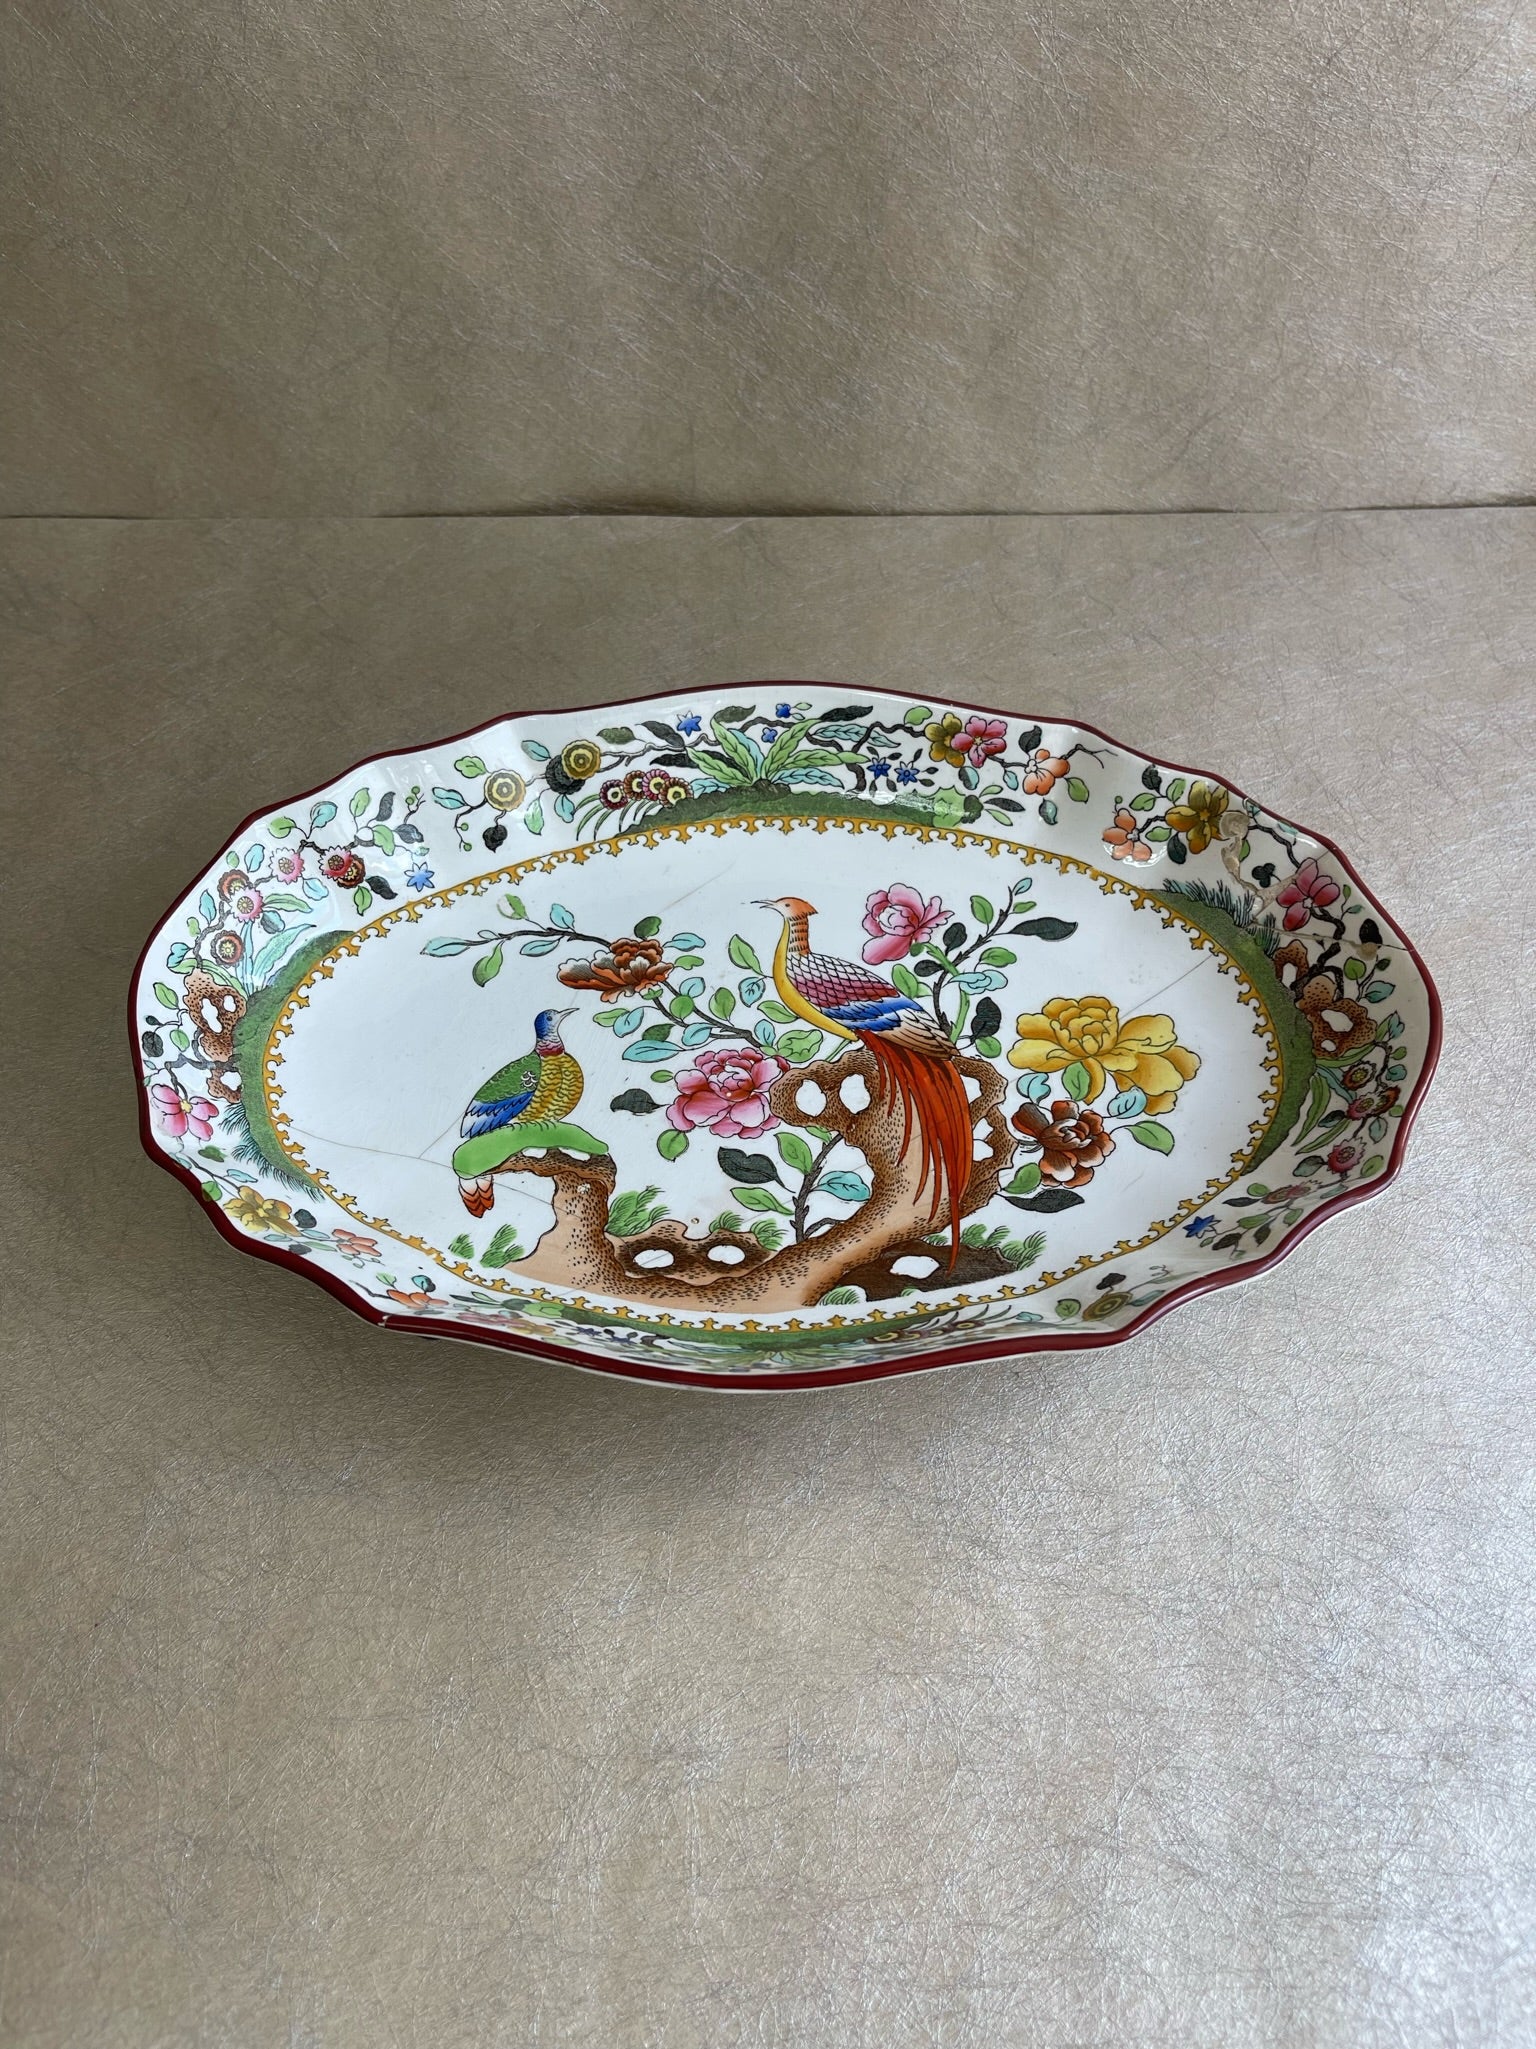 Spode Copeland Waring and Gillow Pheasant 1908